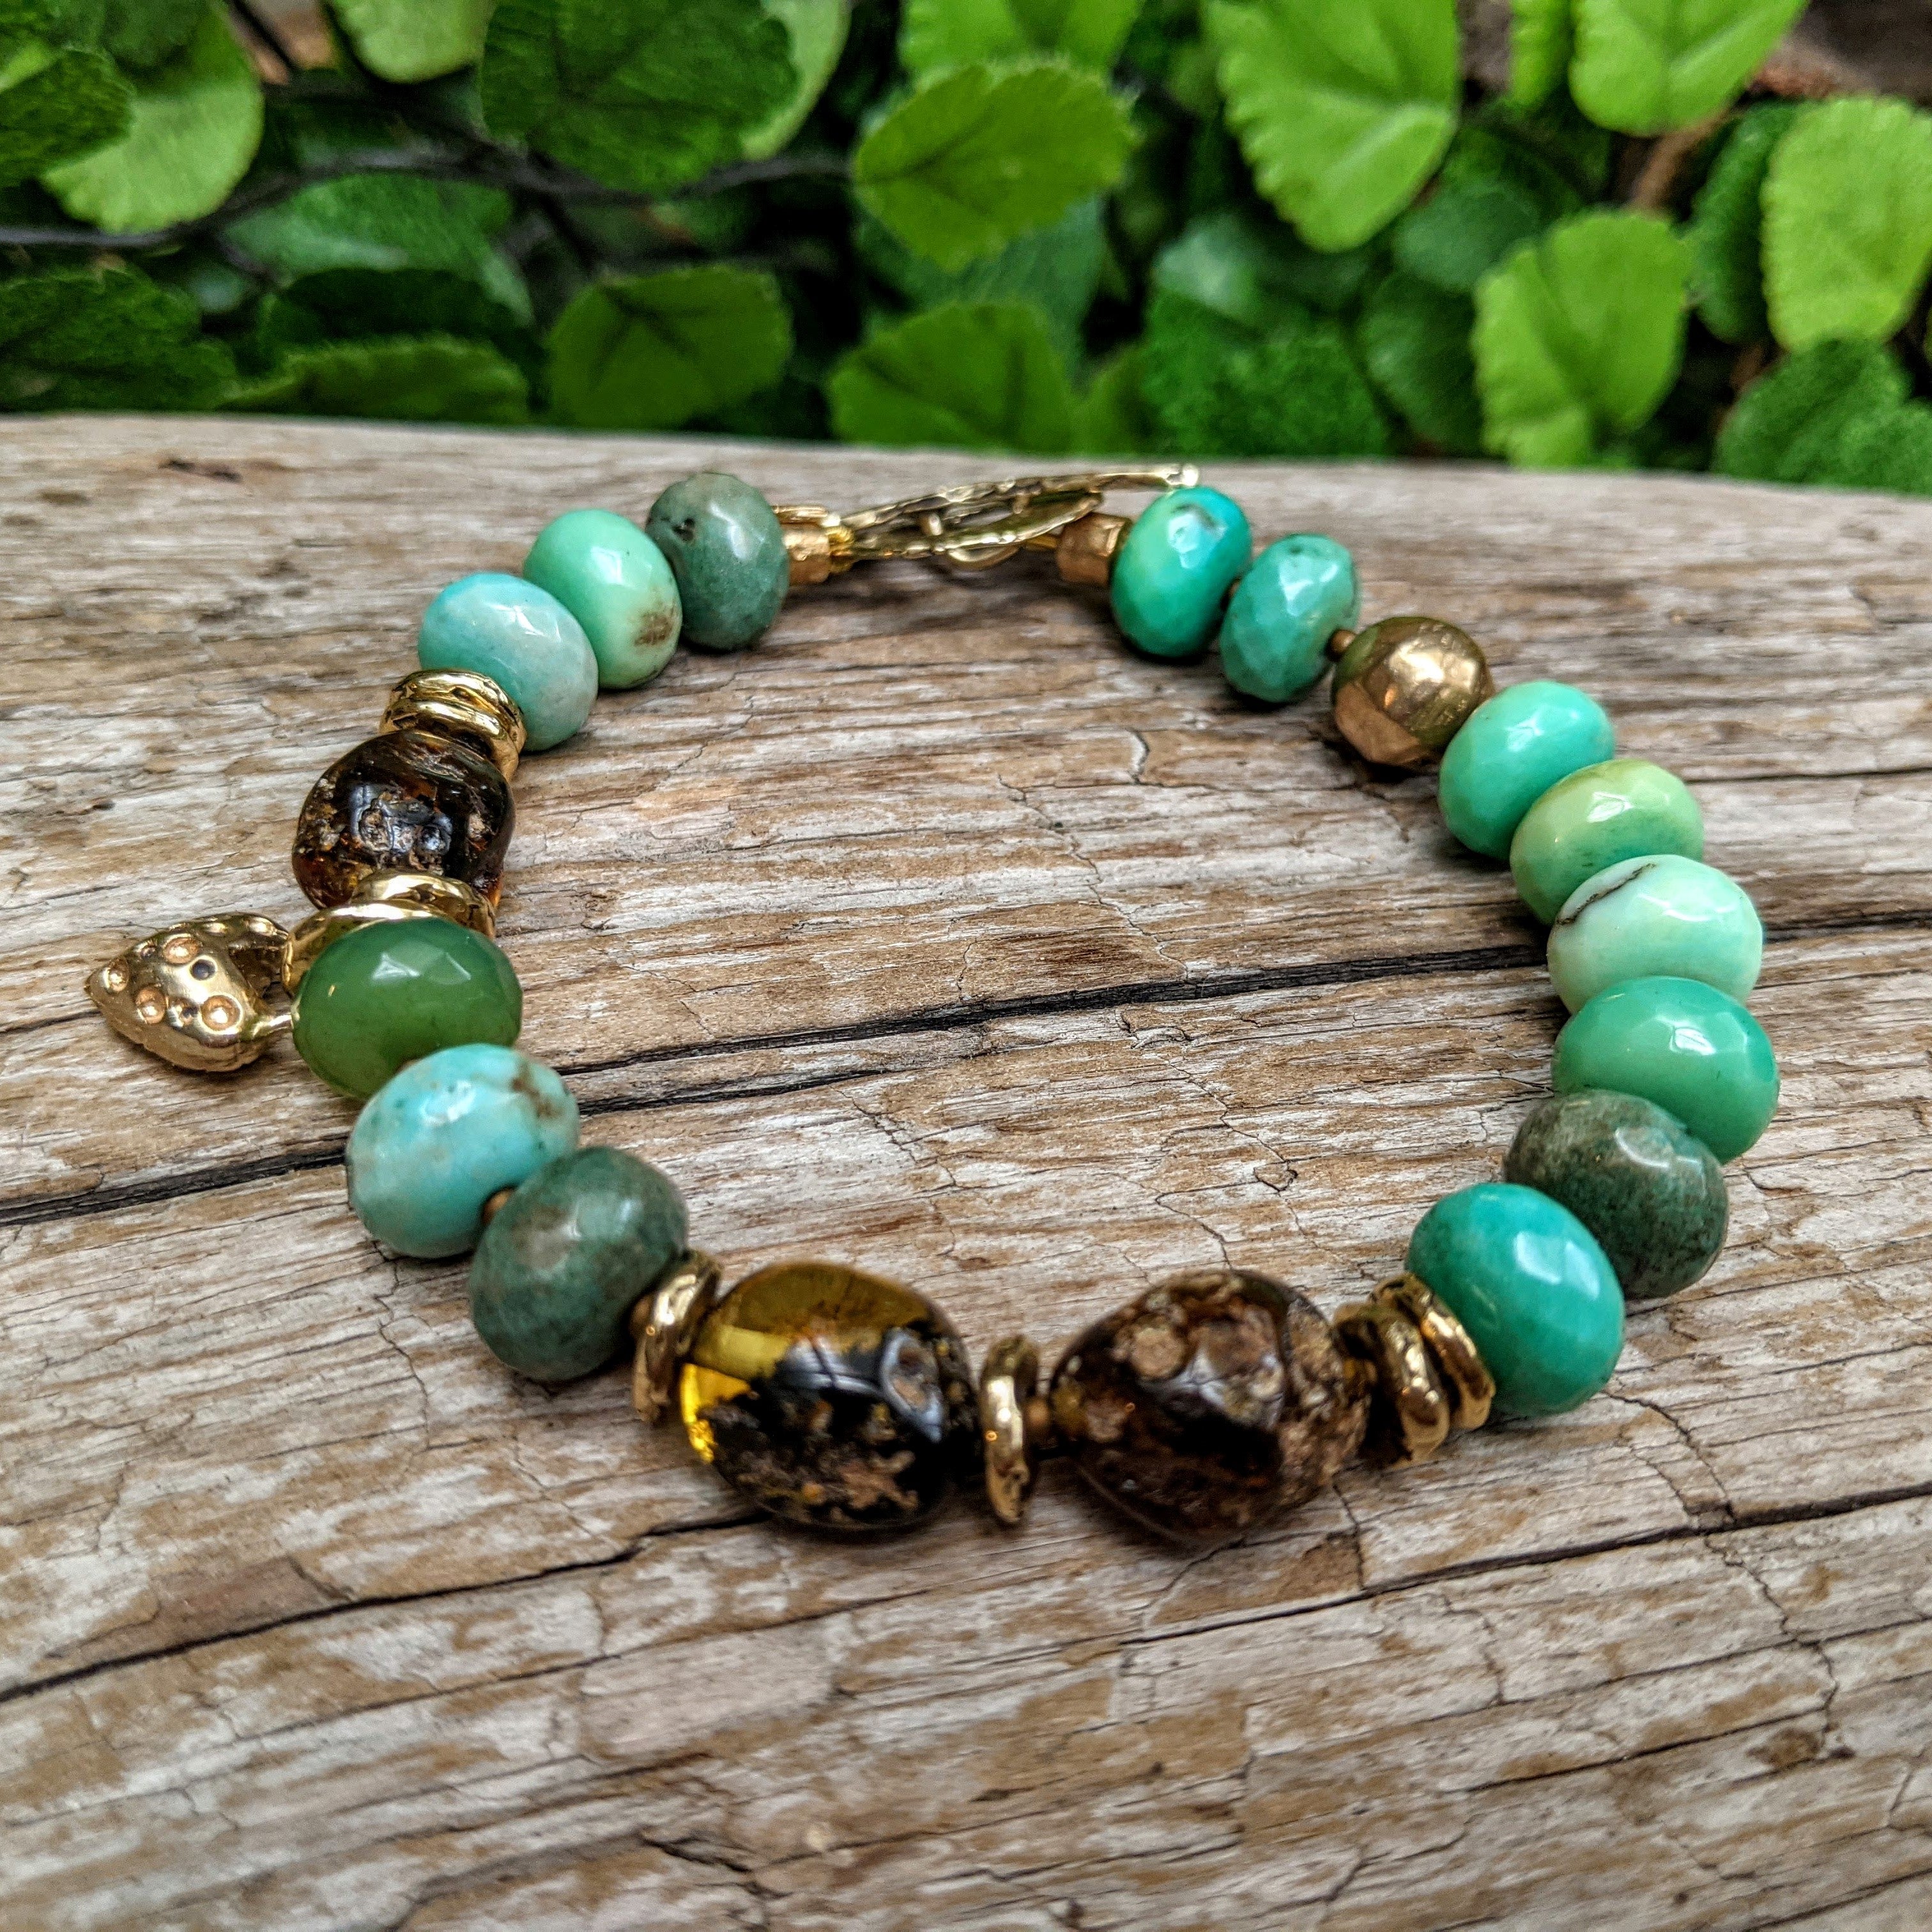 Apple green chrysoprase artisan bracelet with raw Baltic amber and gold bronze heart charm. Organic, rustic handmade bracelet. Handcrafted by Aurora Creative Jewellery.